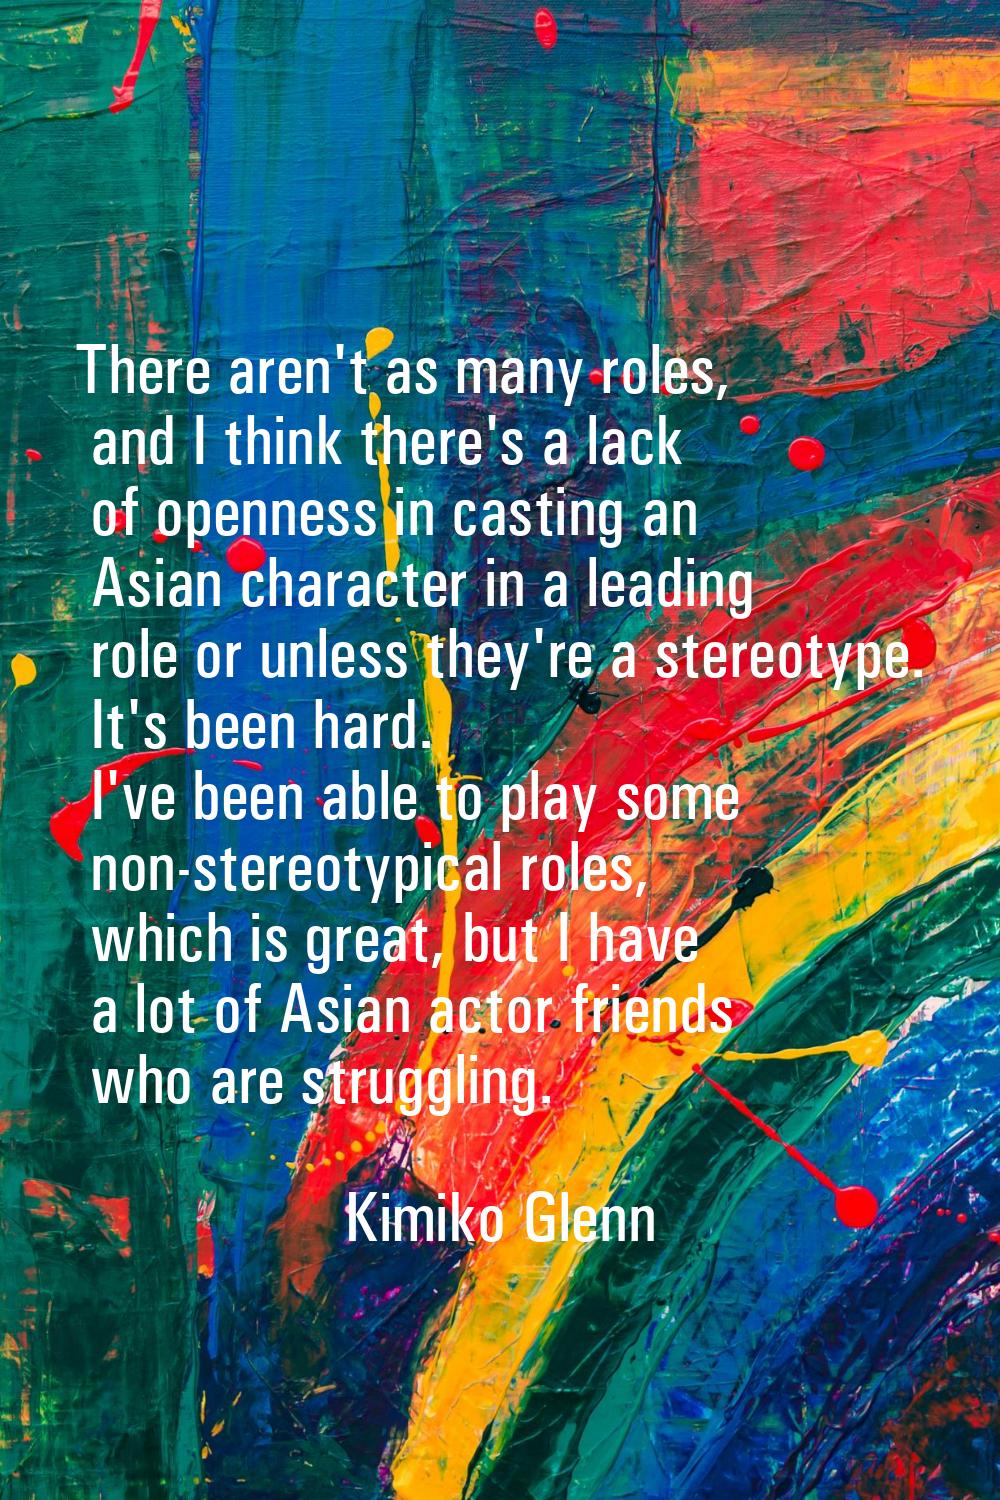 There aren't as many roles, and I think there's a lack of openness in casting an Asian character in